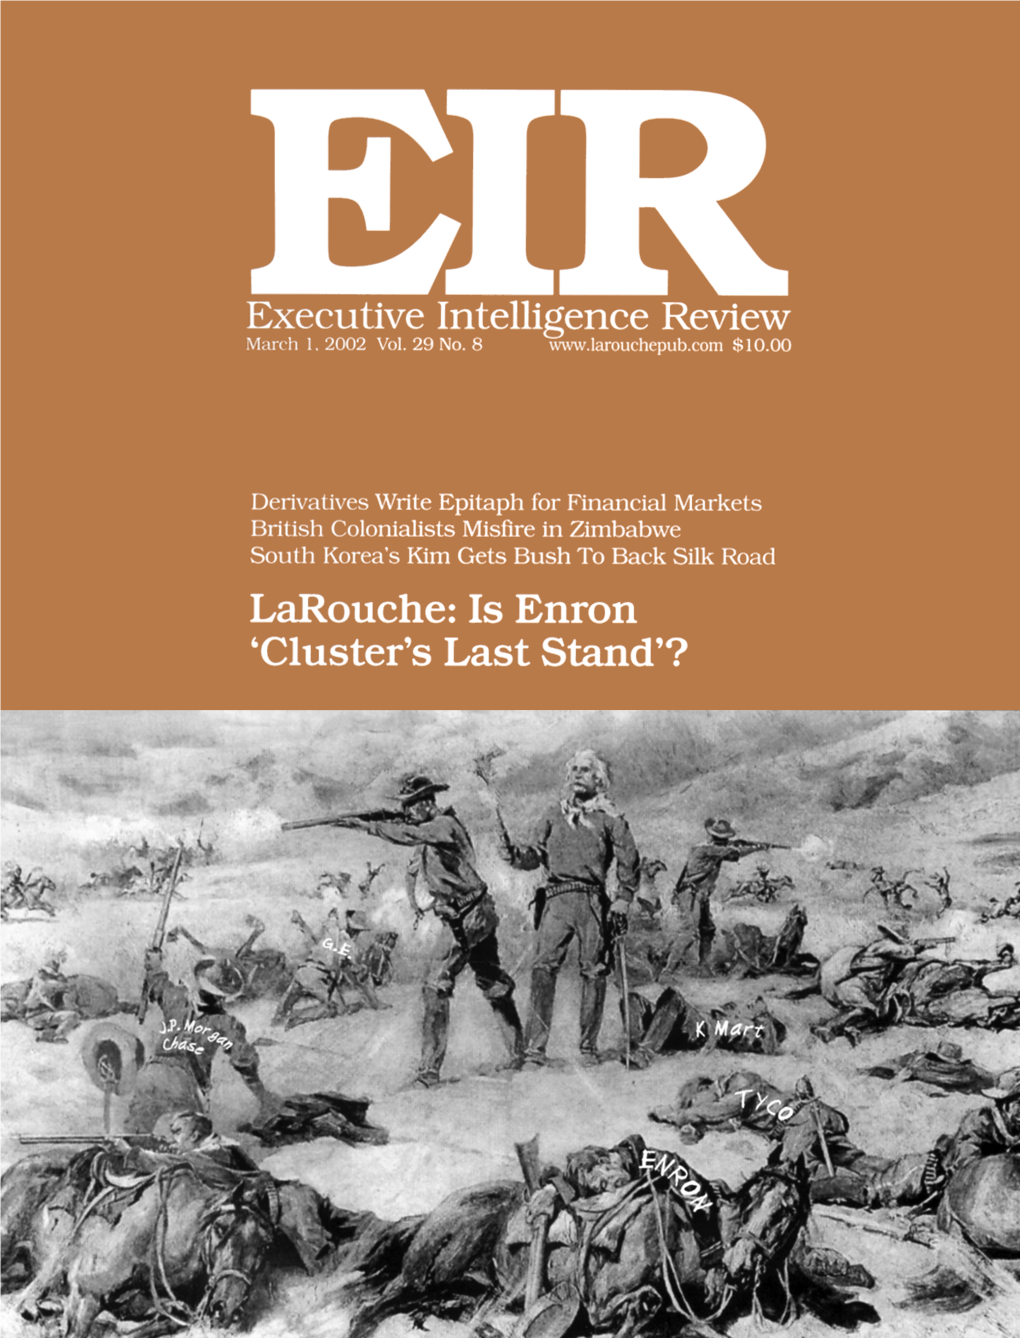 Executive Intelligence Review, Volume 29, Number 8, March 1, 2002